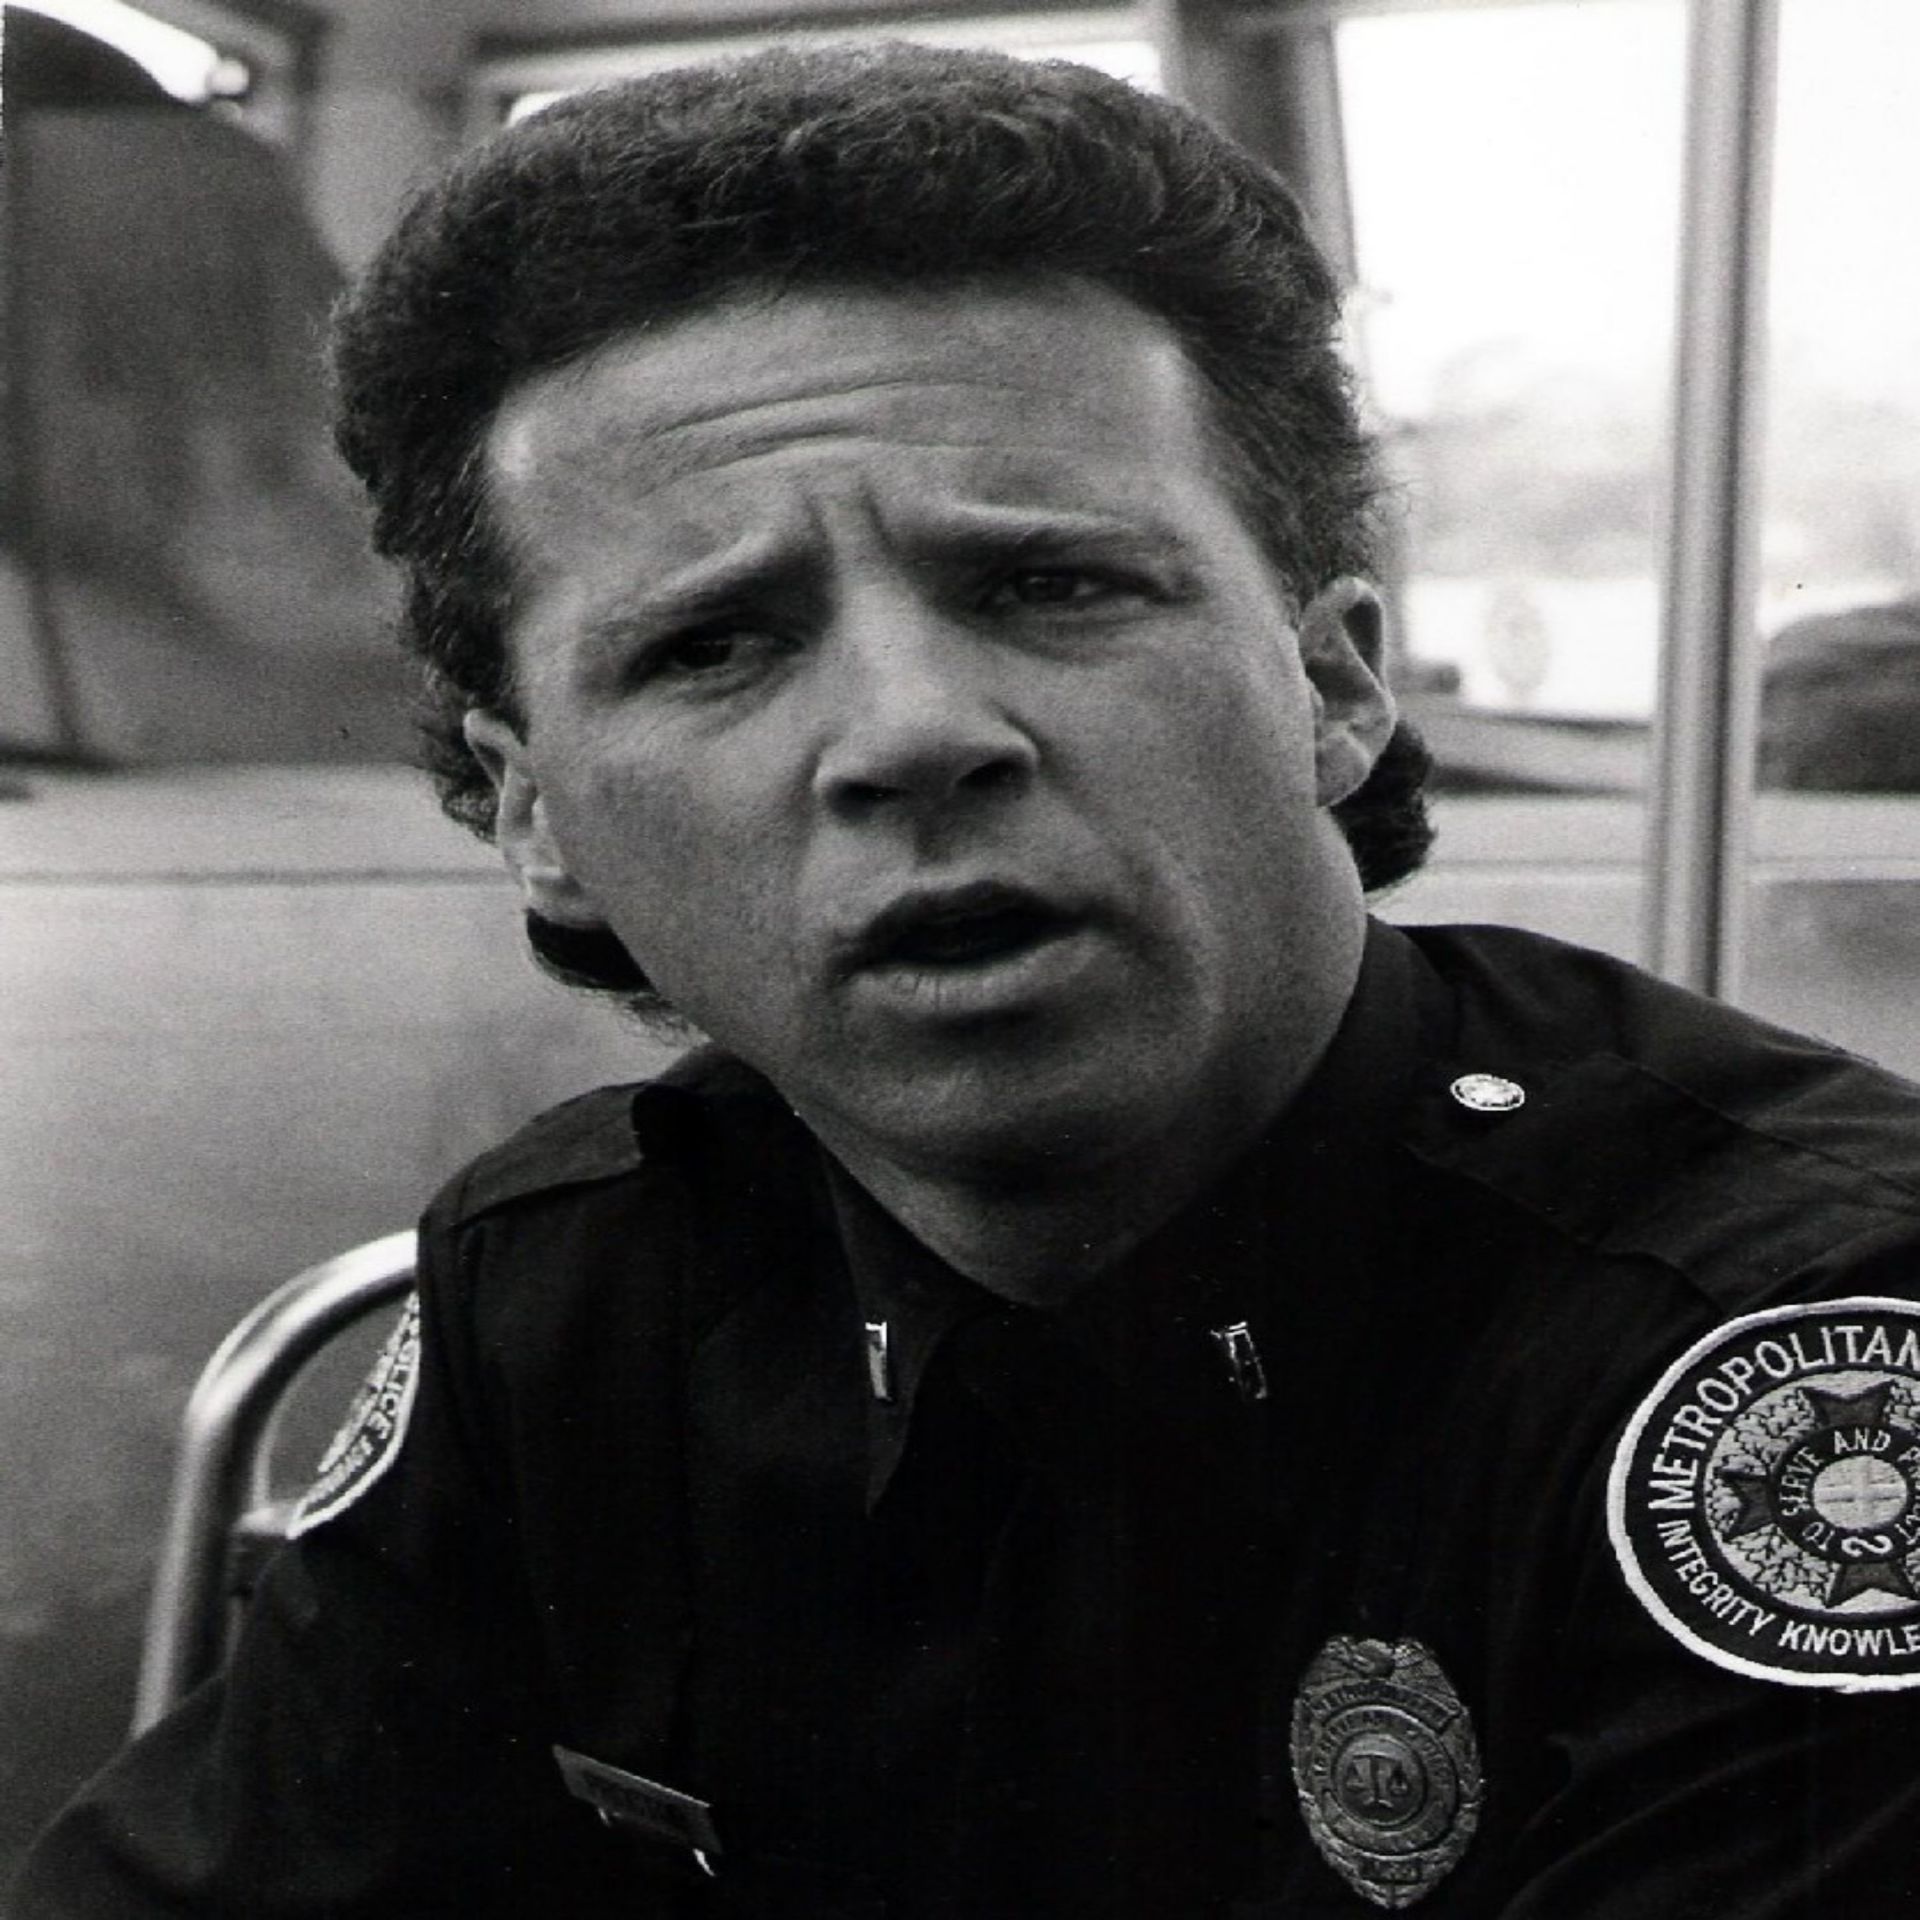 Lance Kinsey from Police Academy Franchise